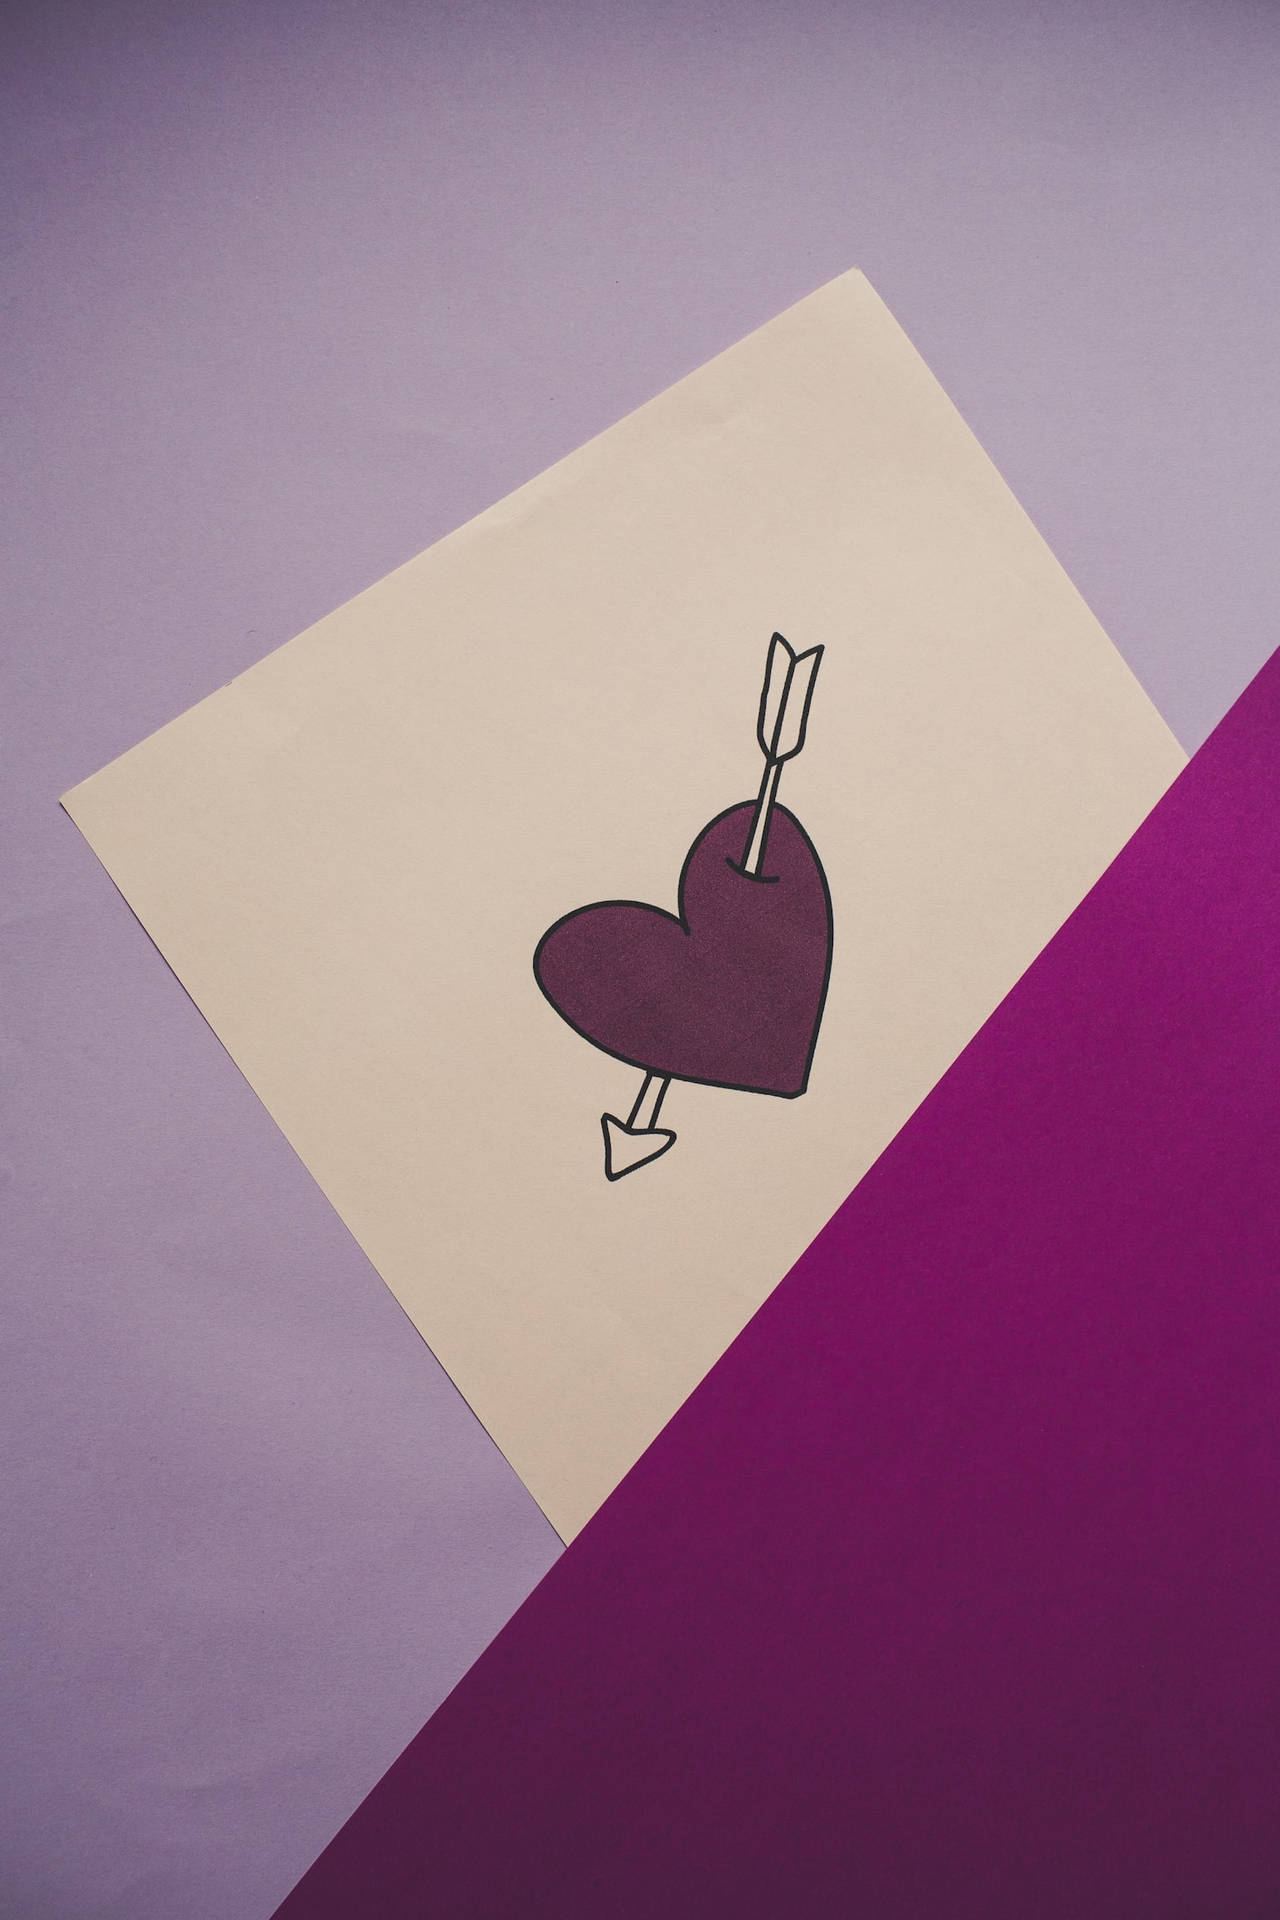 Art Drawing Of A Purple Heart With Arrow